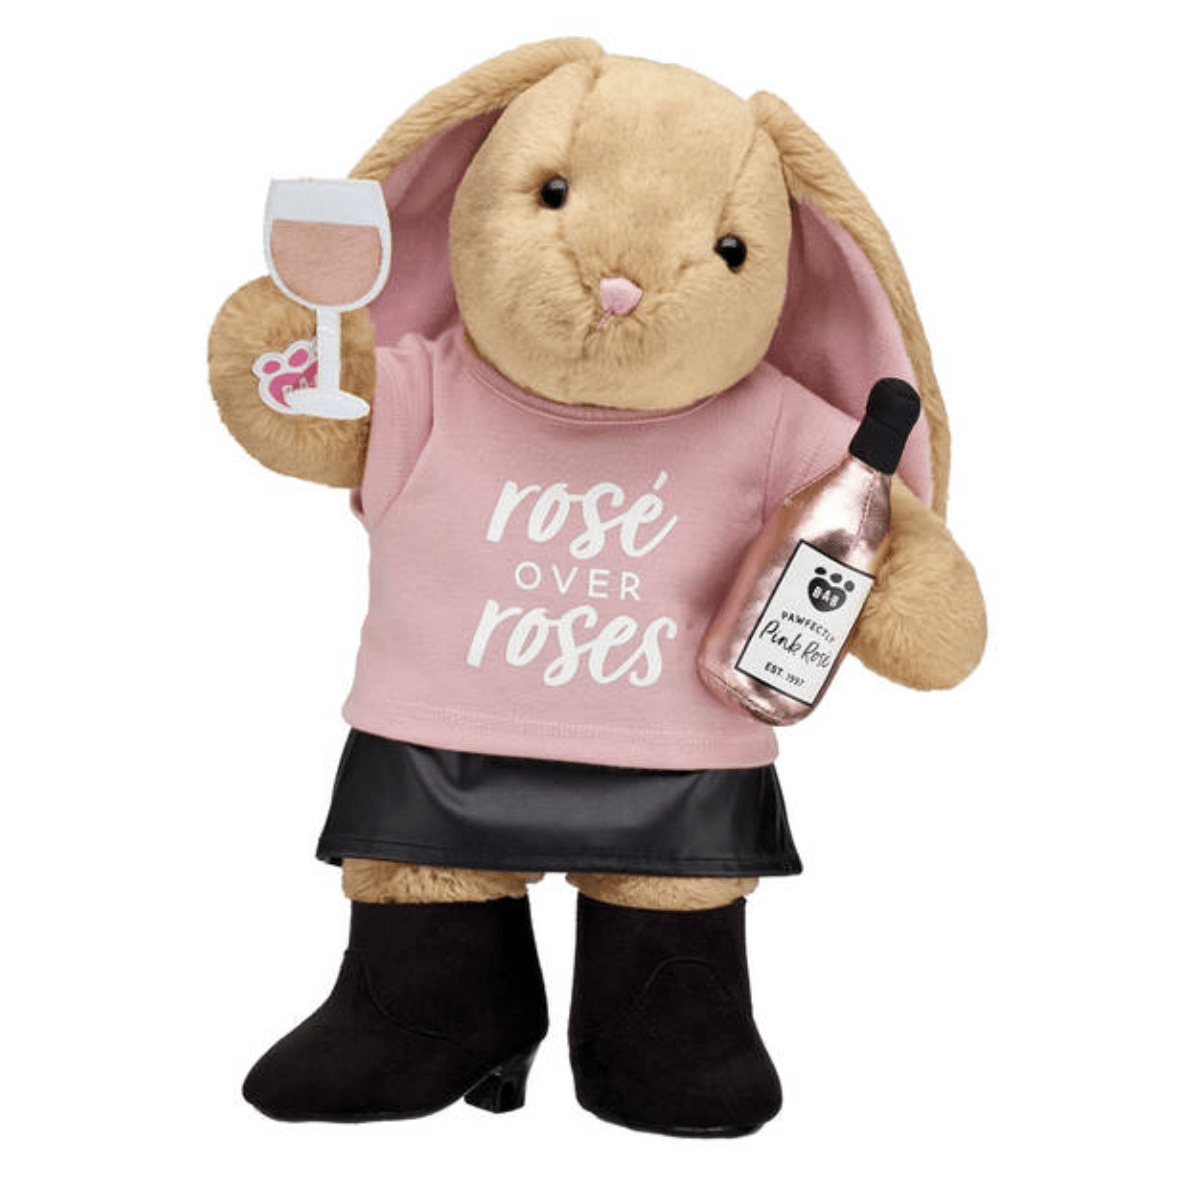 A bunny holding a glass of wine and a bottle of rose while wearing a shirt that says "rose over roses."